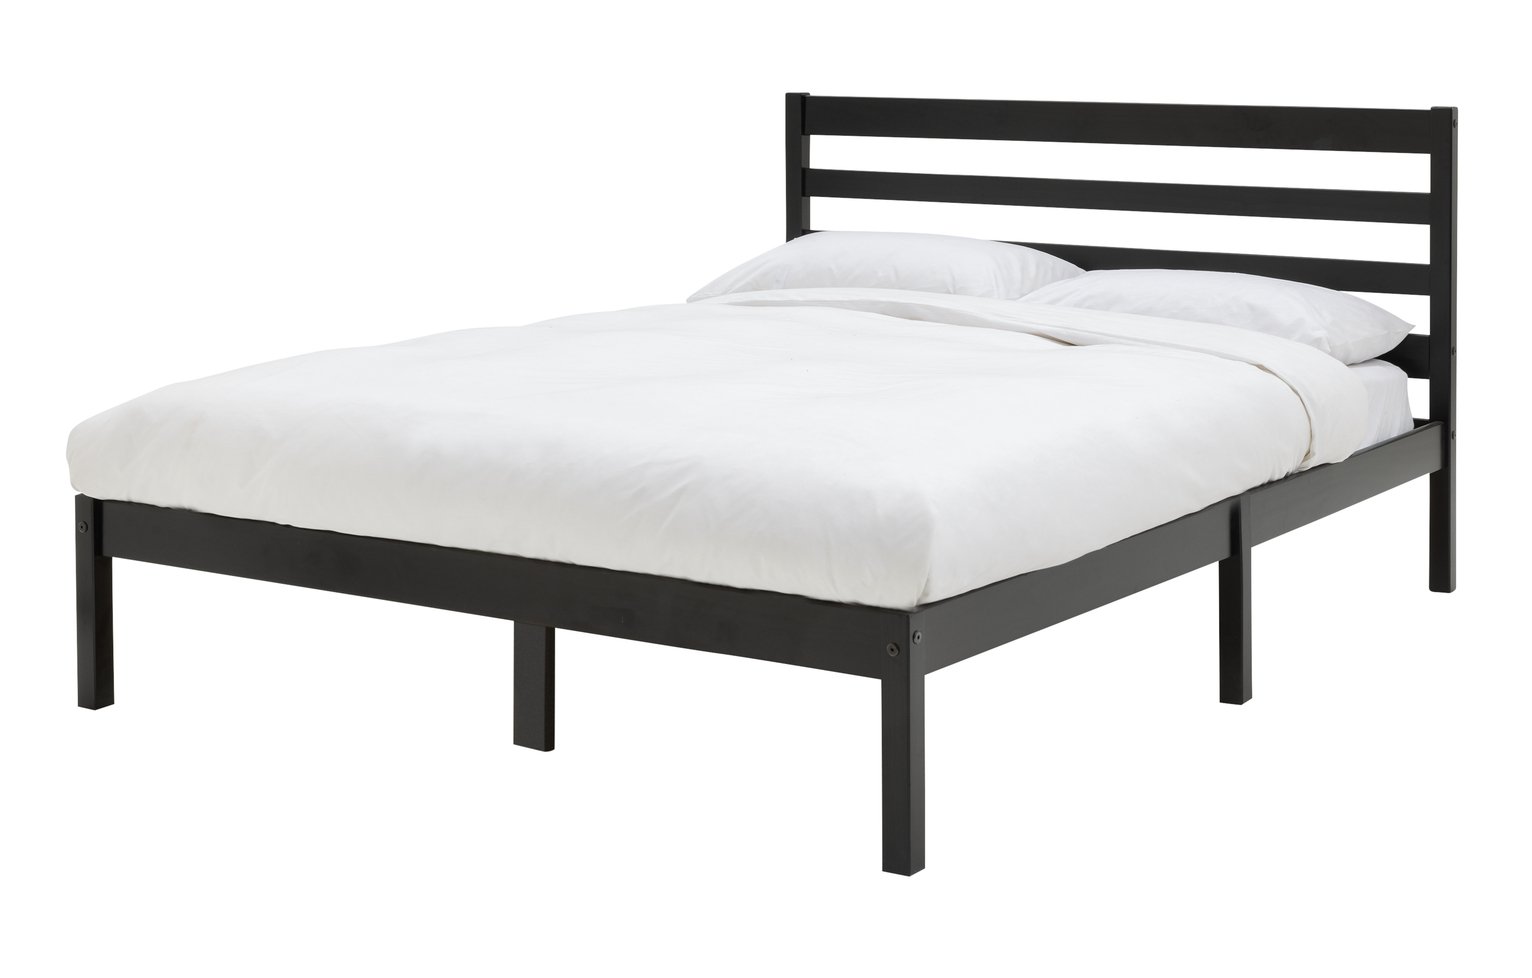 Argos Home Kaycie Double Wooden Bed Frame - Black